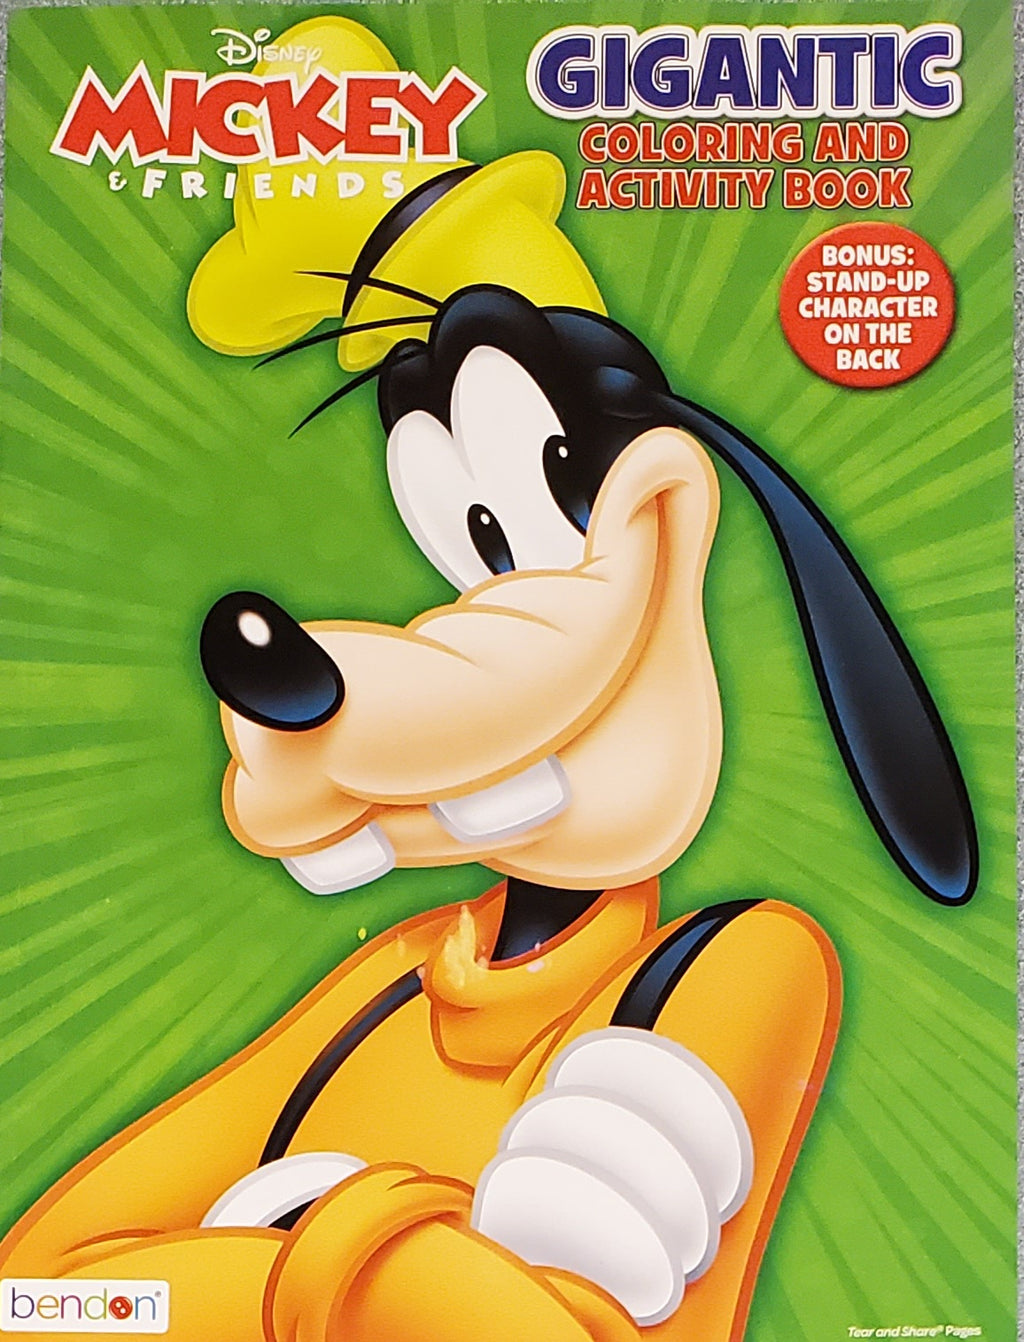 Gigantic Coloring Book Disney Mickey and Friends - Goofy Cover